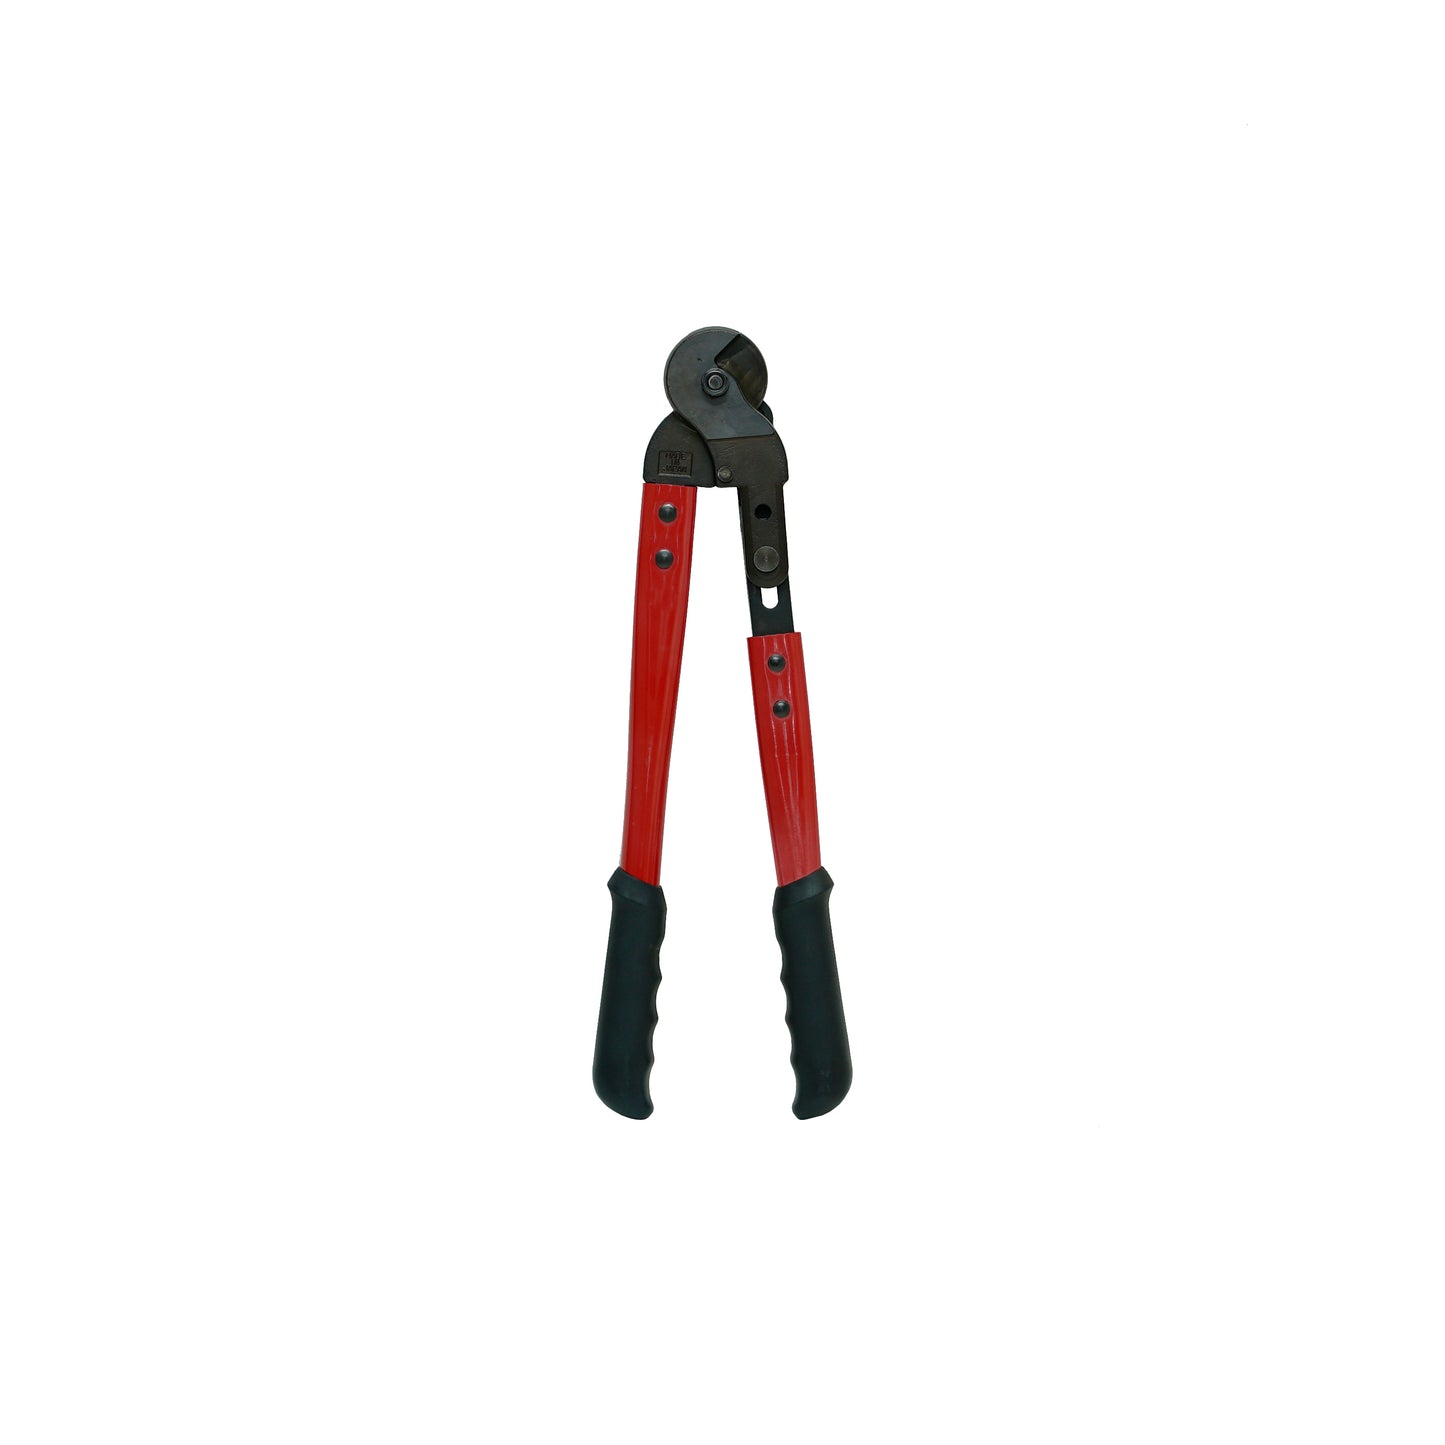 [ New Idea! Lever-Type ] High-Leverage Wire Rope Cutter | MADE IN JAPAN | WRC-450HL